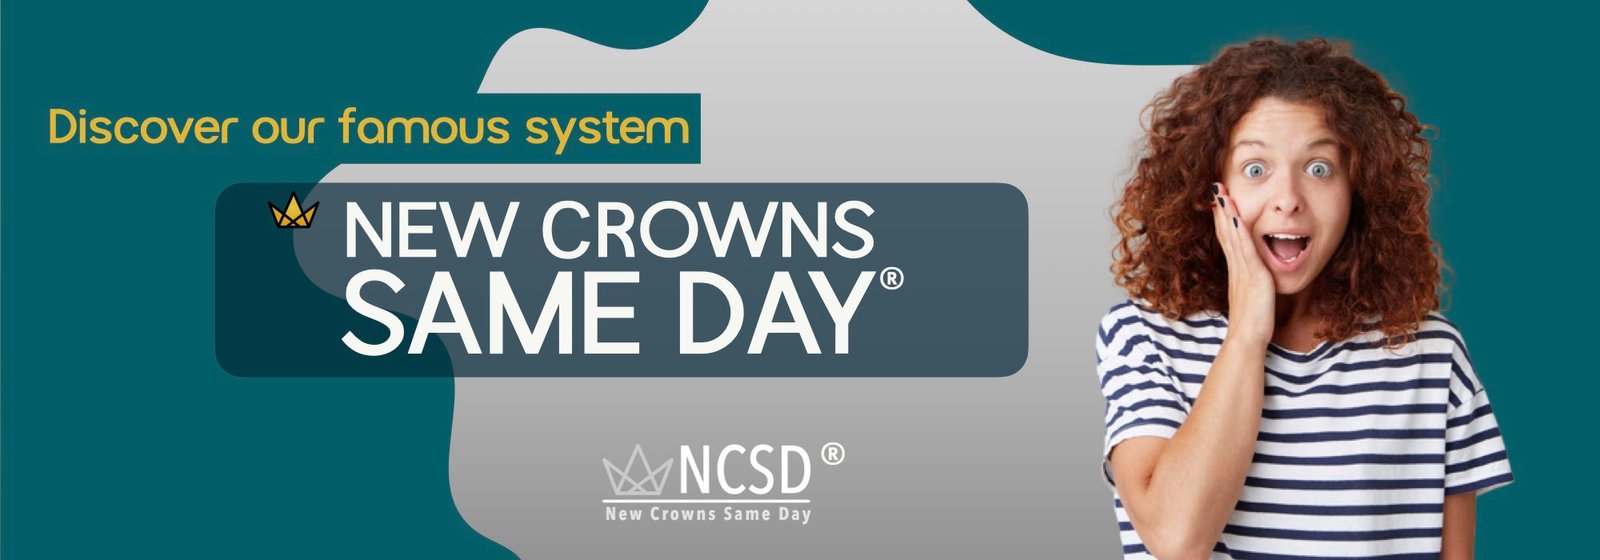 Discover our famous system- New Dental Crowns Same Day